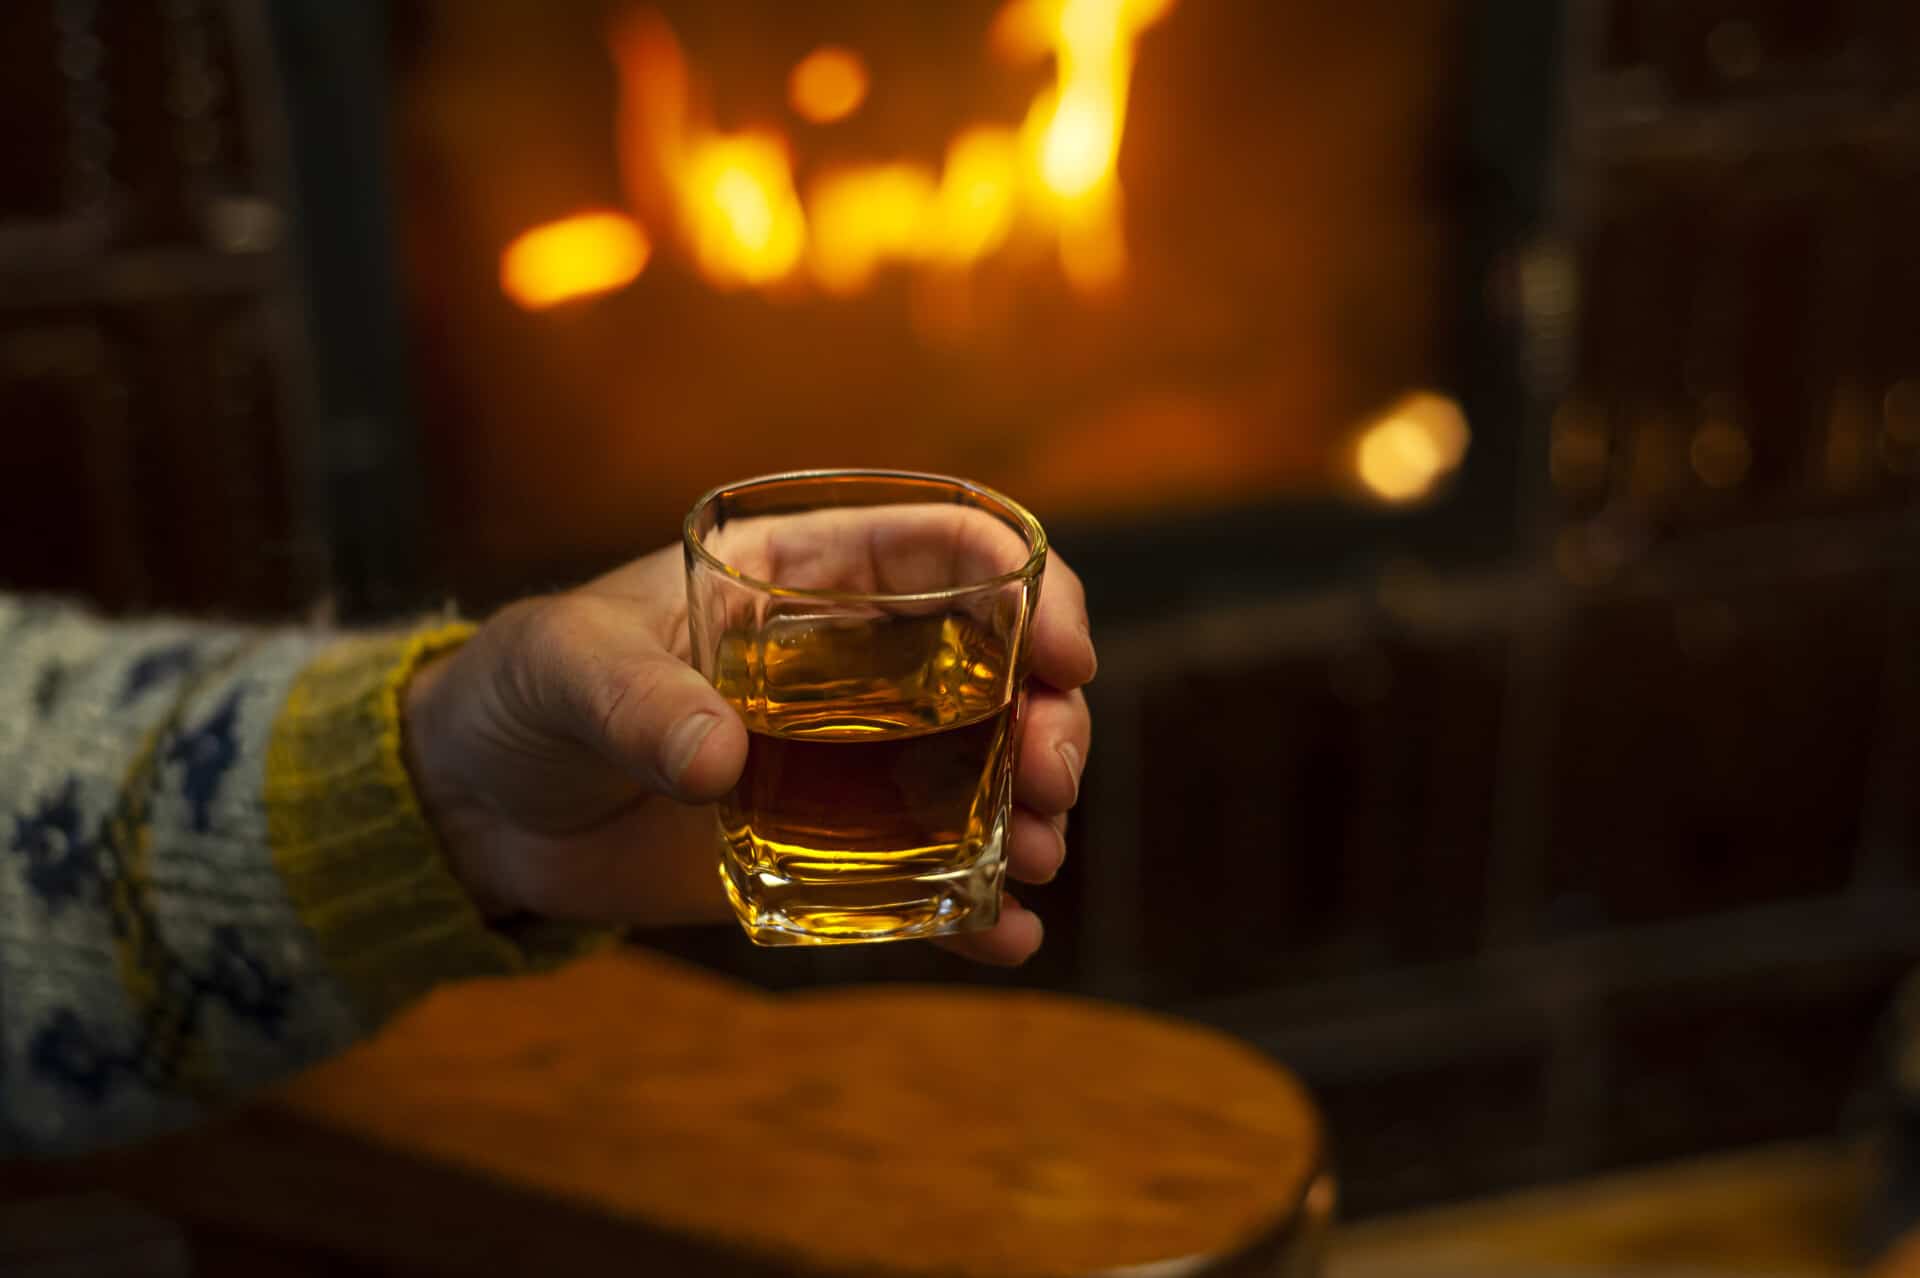 A man holds a glass of whiskey in front of a fireplace